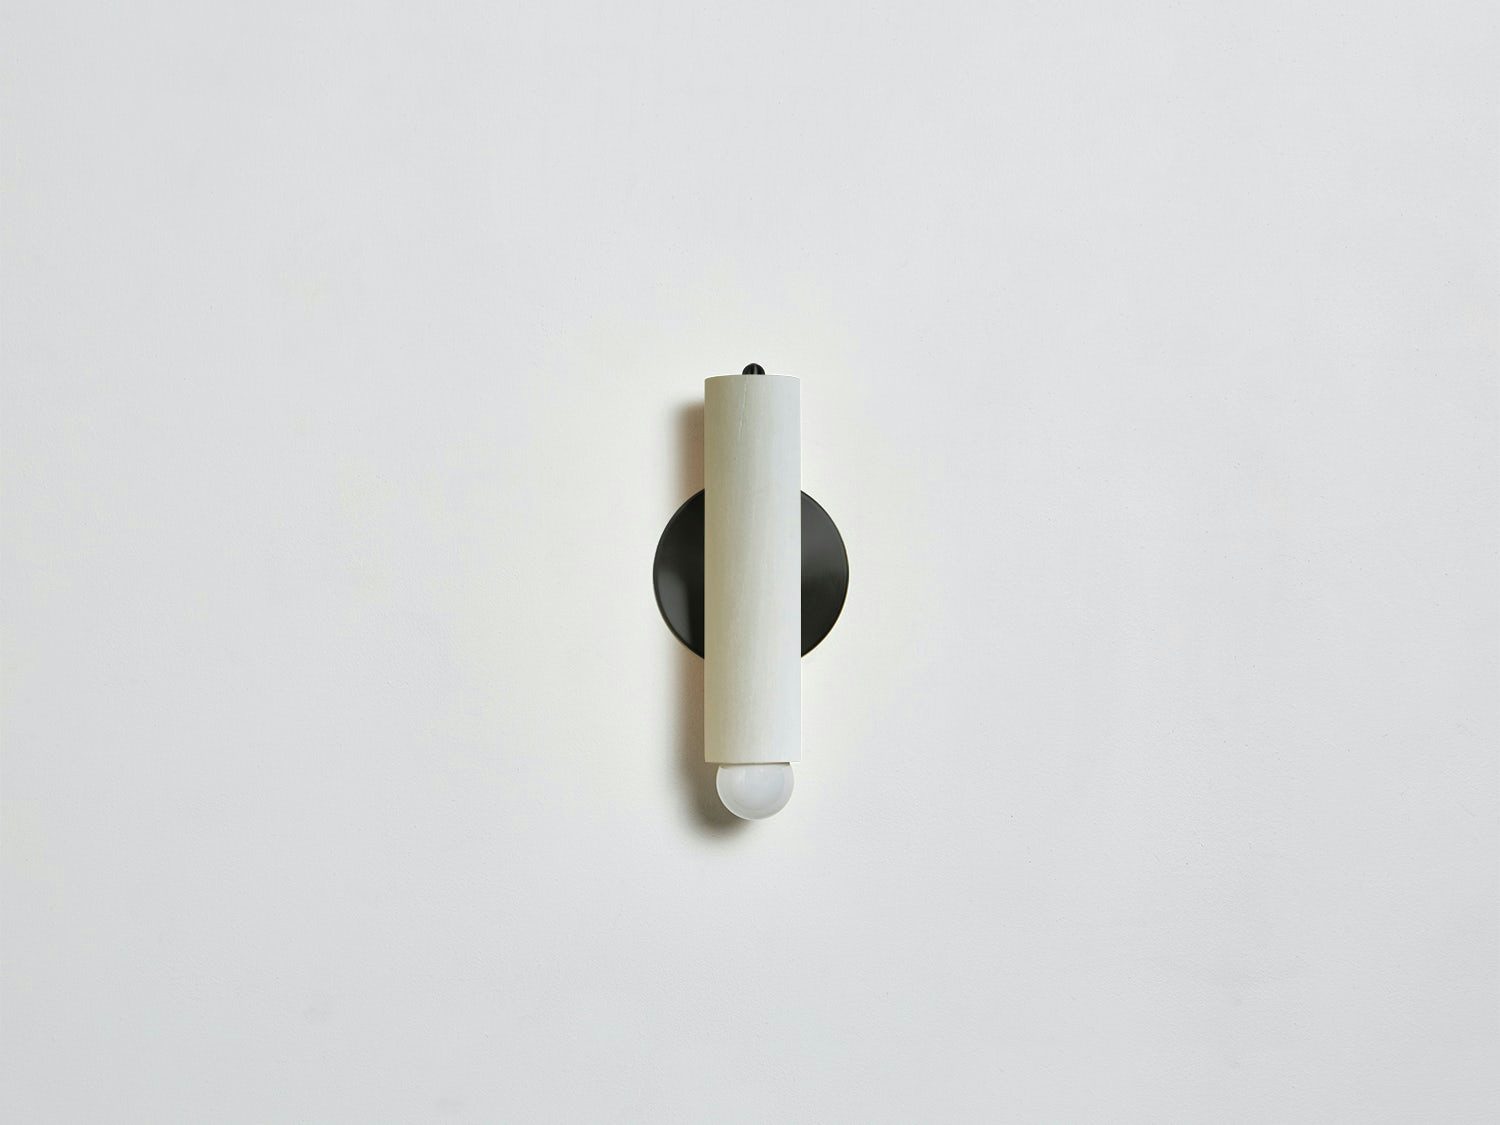 gallery image for Lodge Sconce_Painted_Off_Straight_Bone White-Blackened Steel